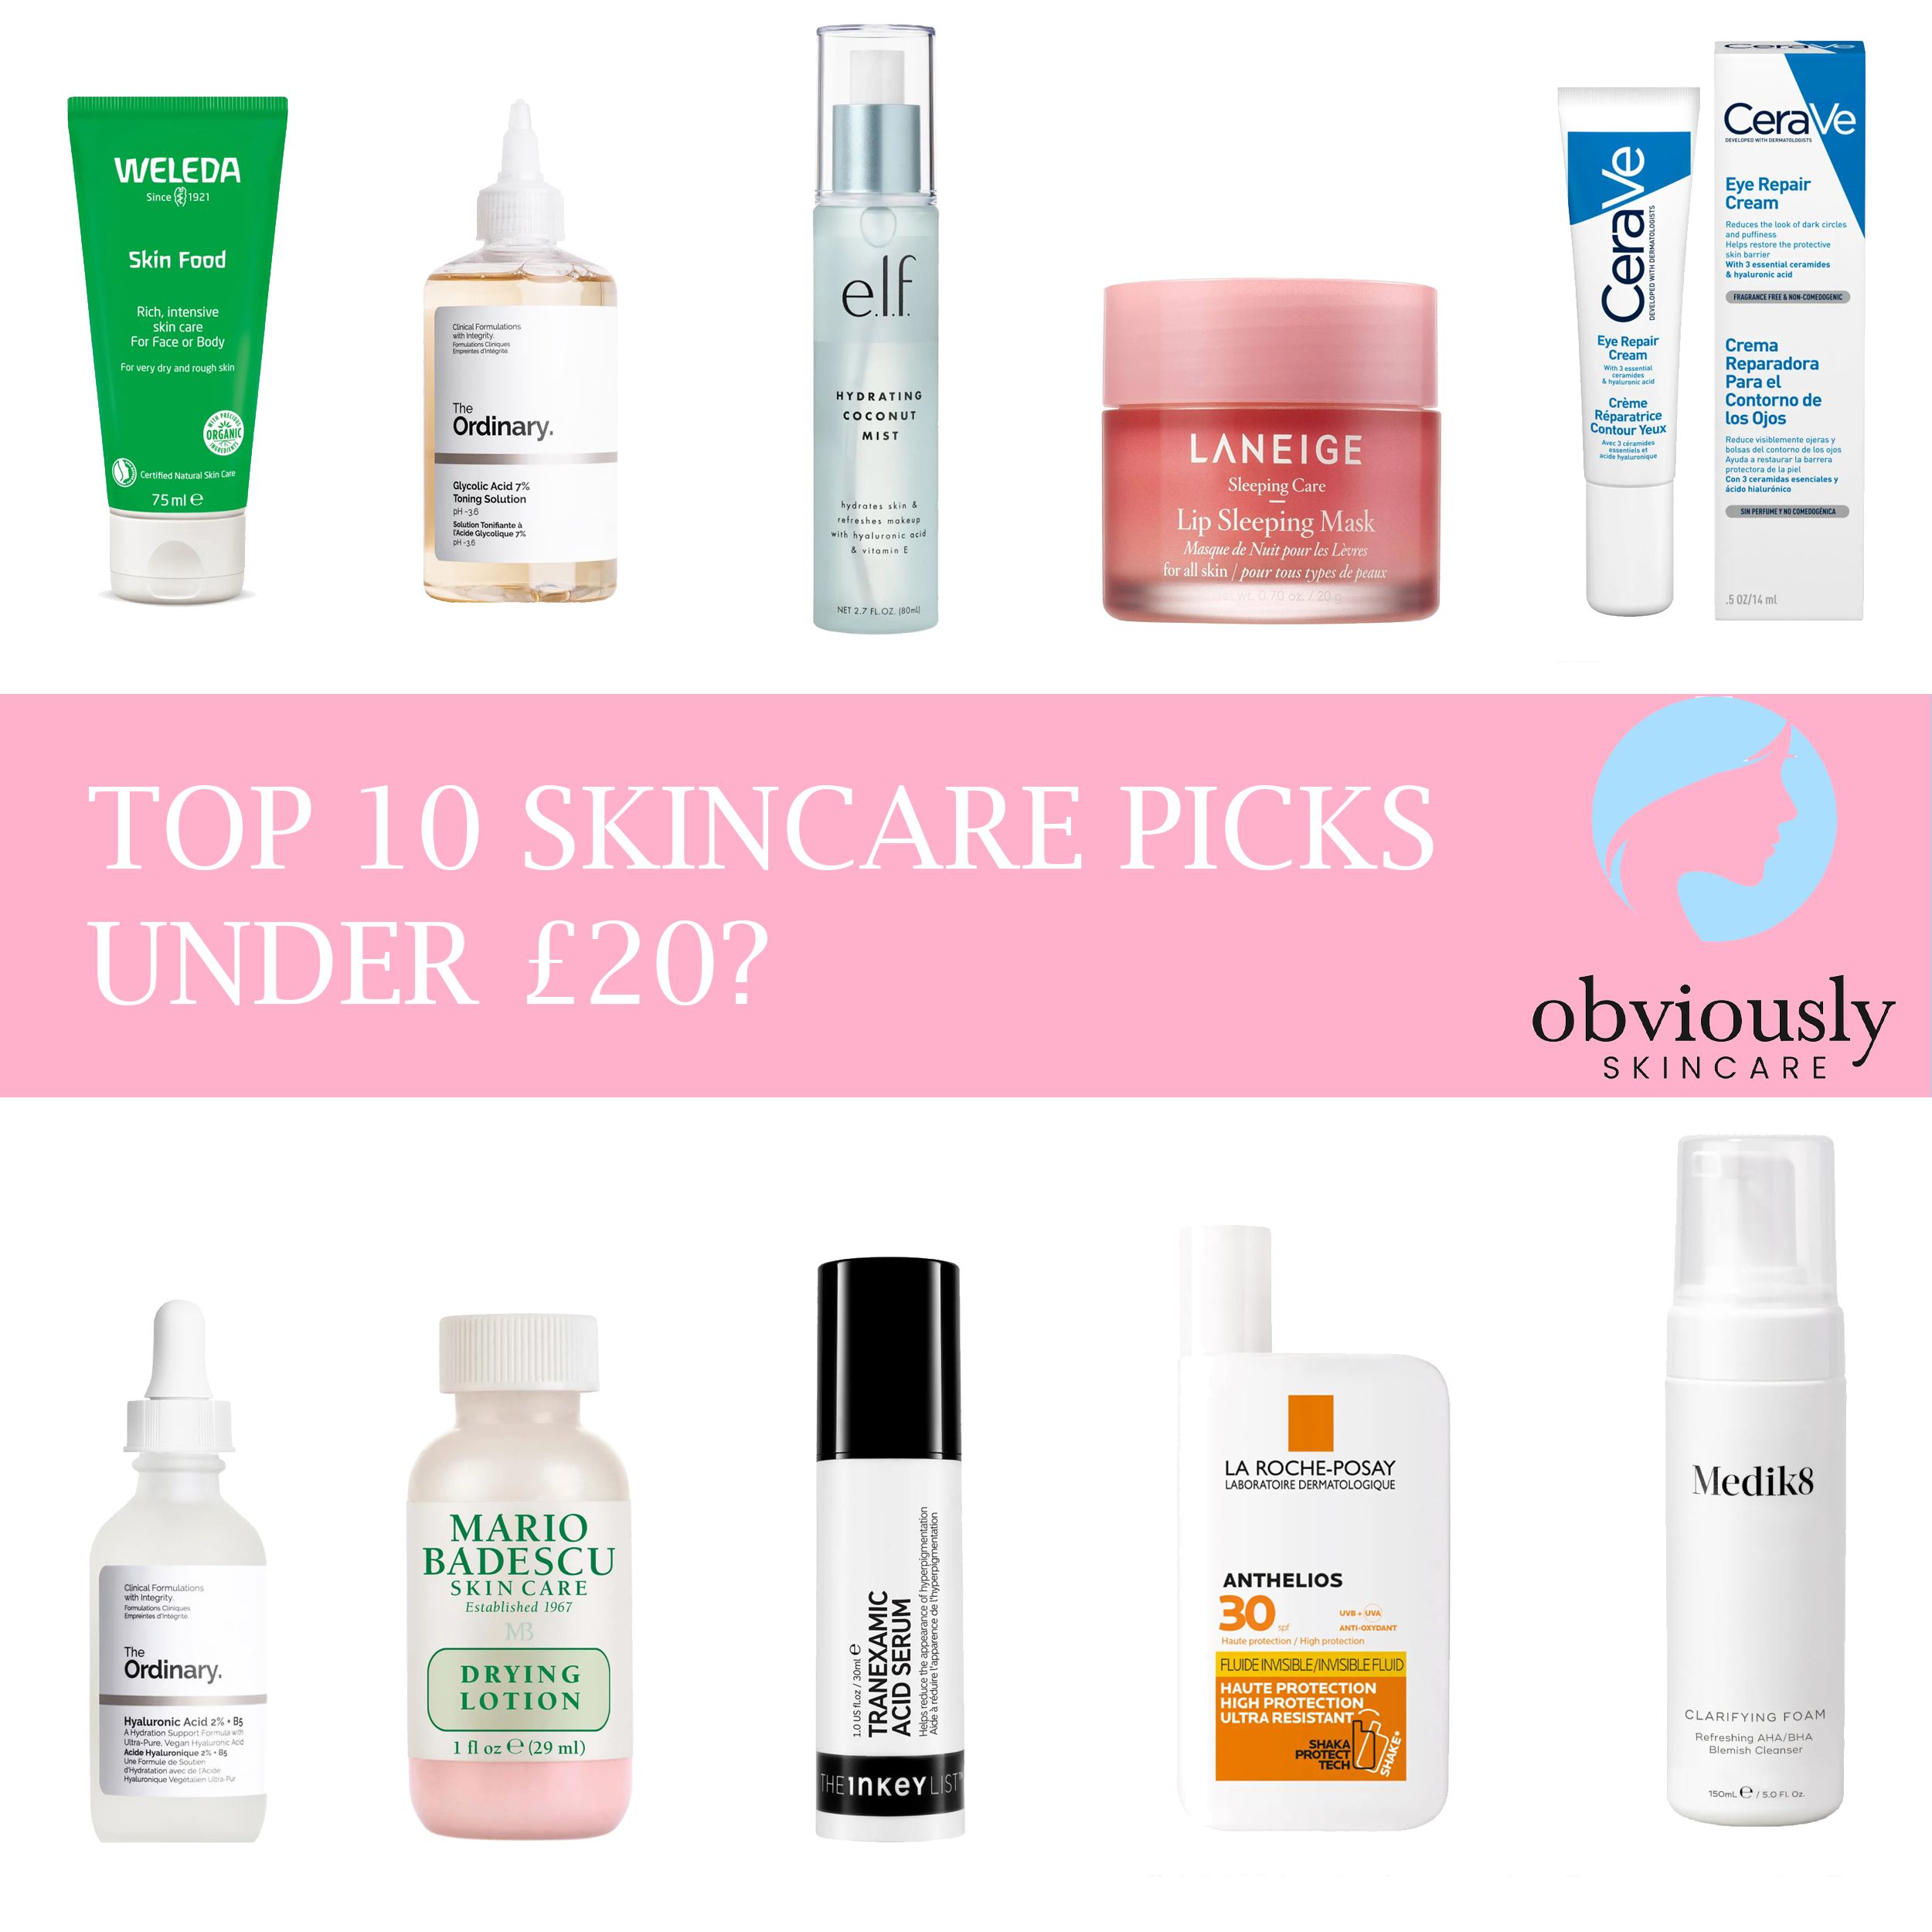 Our Top 10 Skincare Picks For Under £20